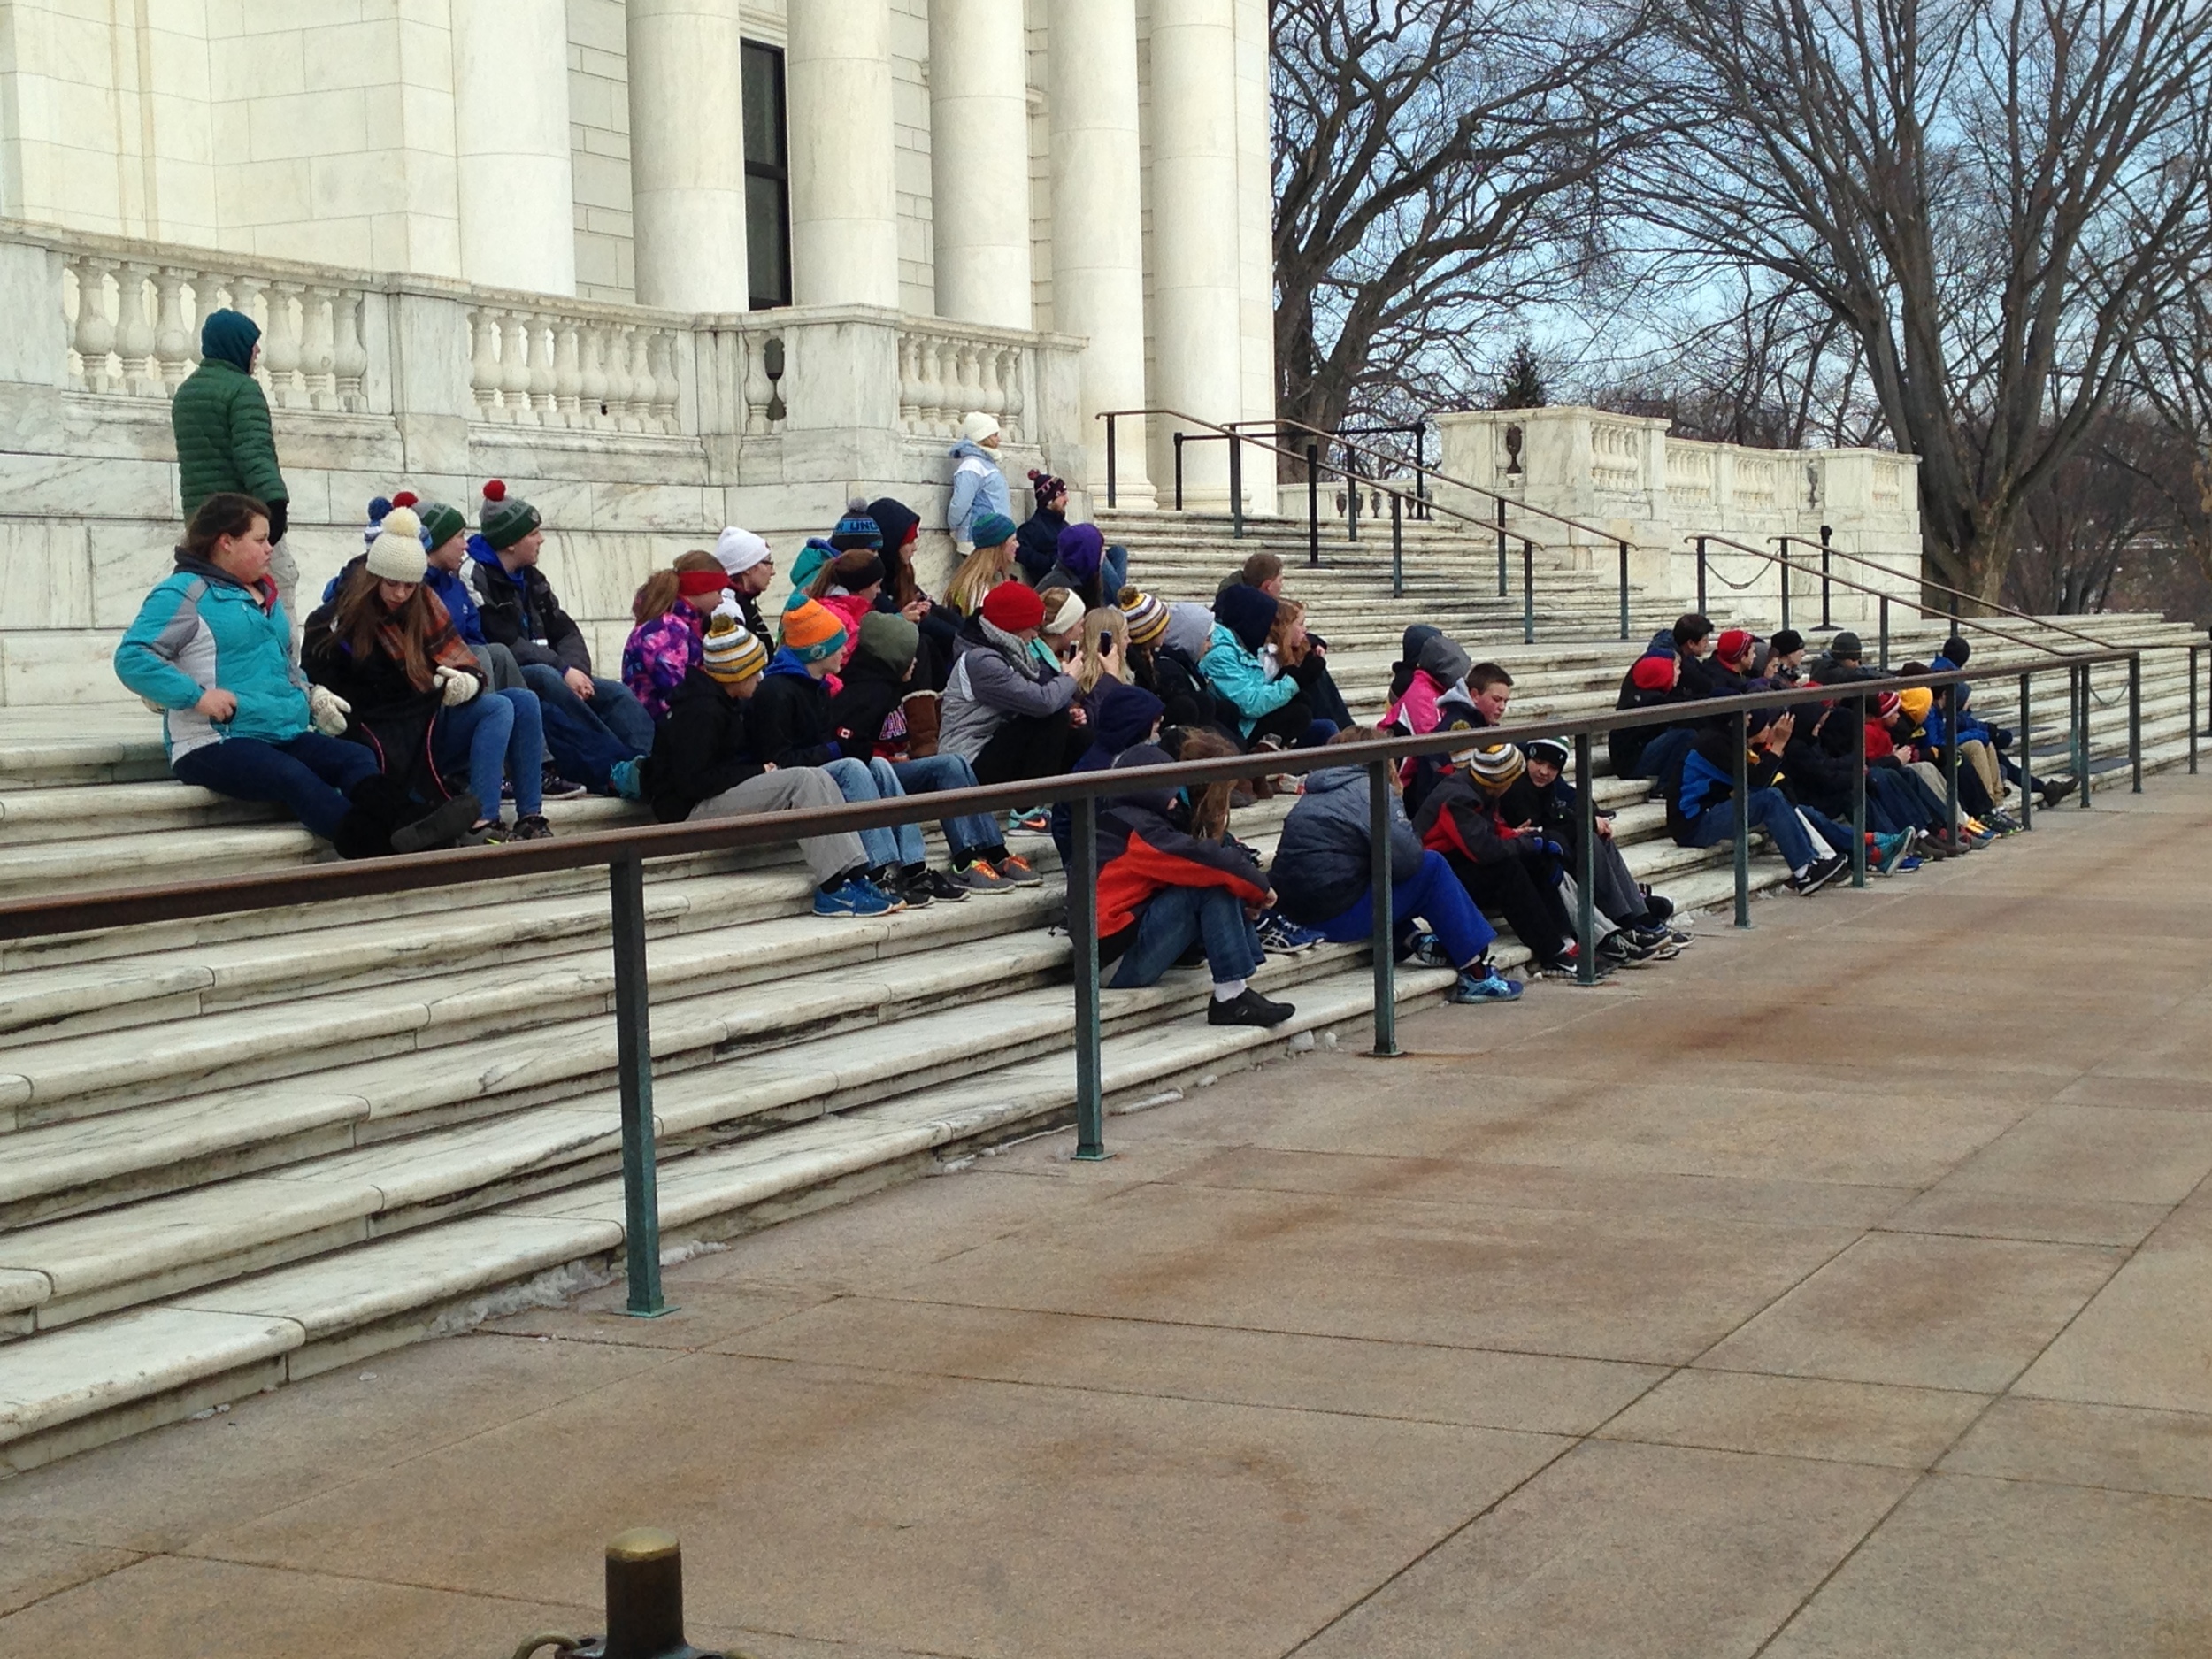 The kids get in position to watch the changing of the guard.